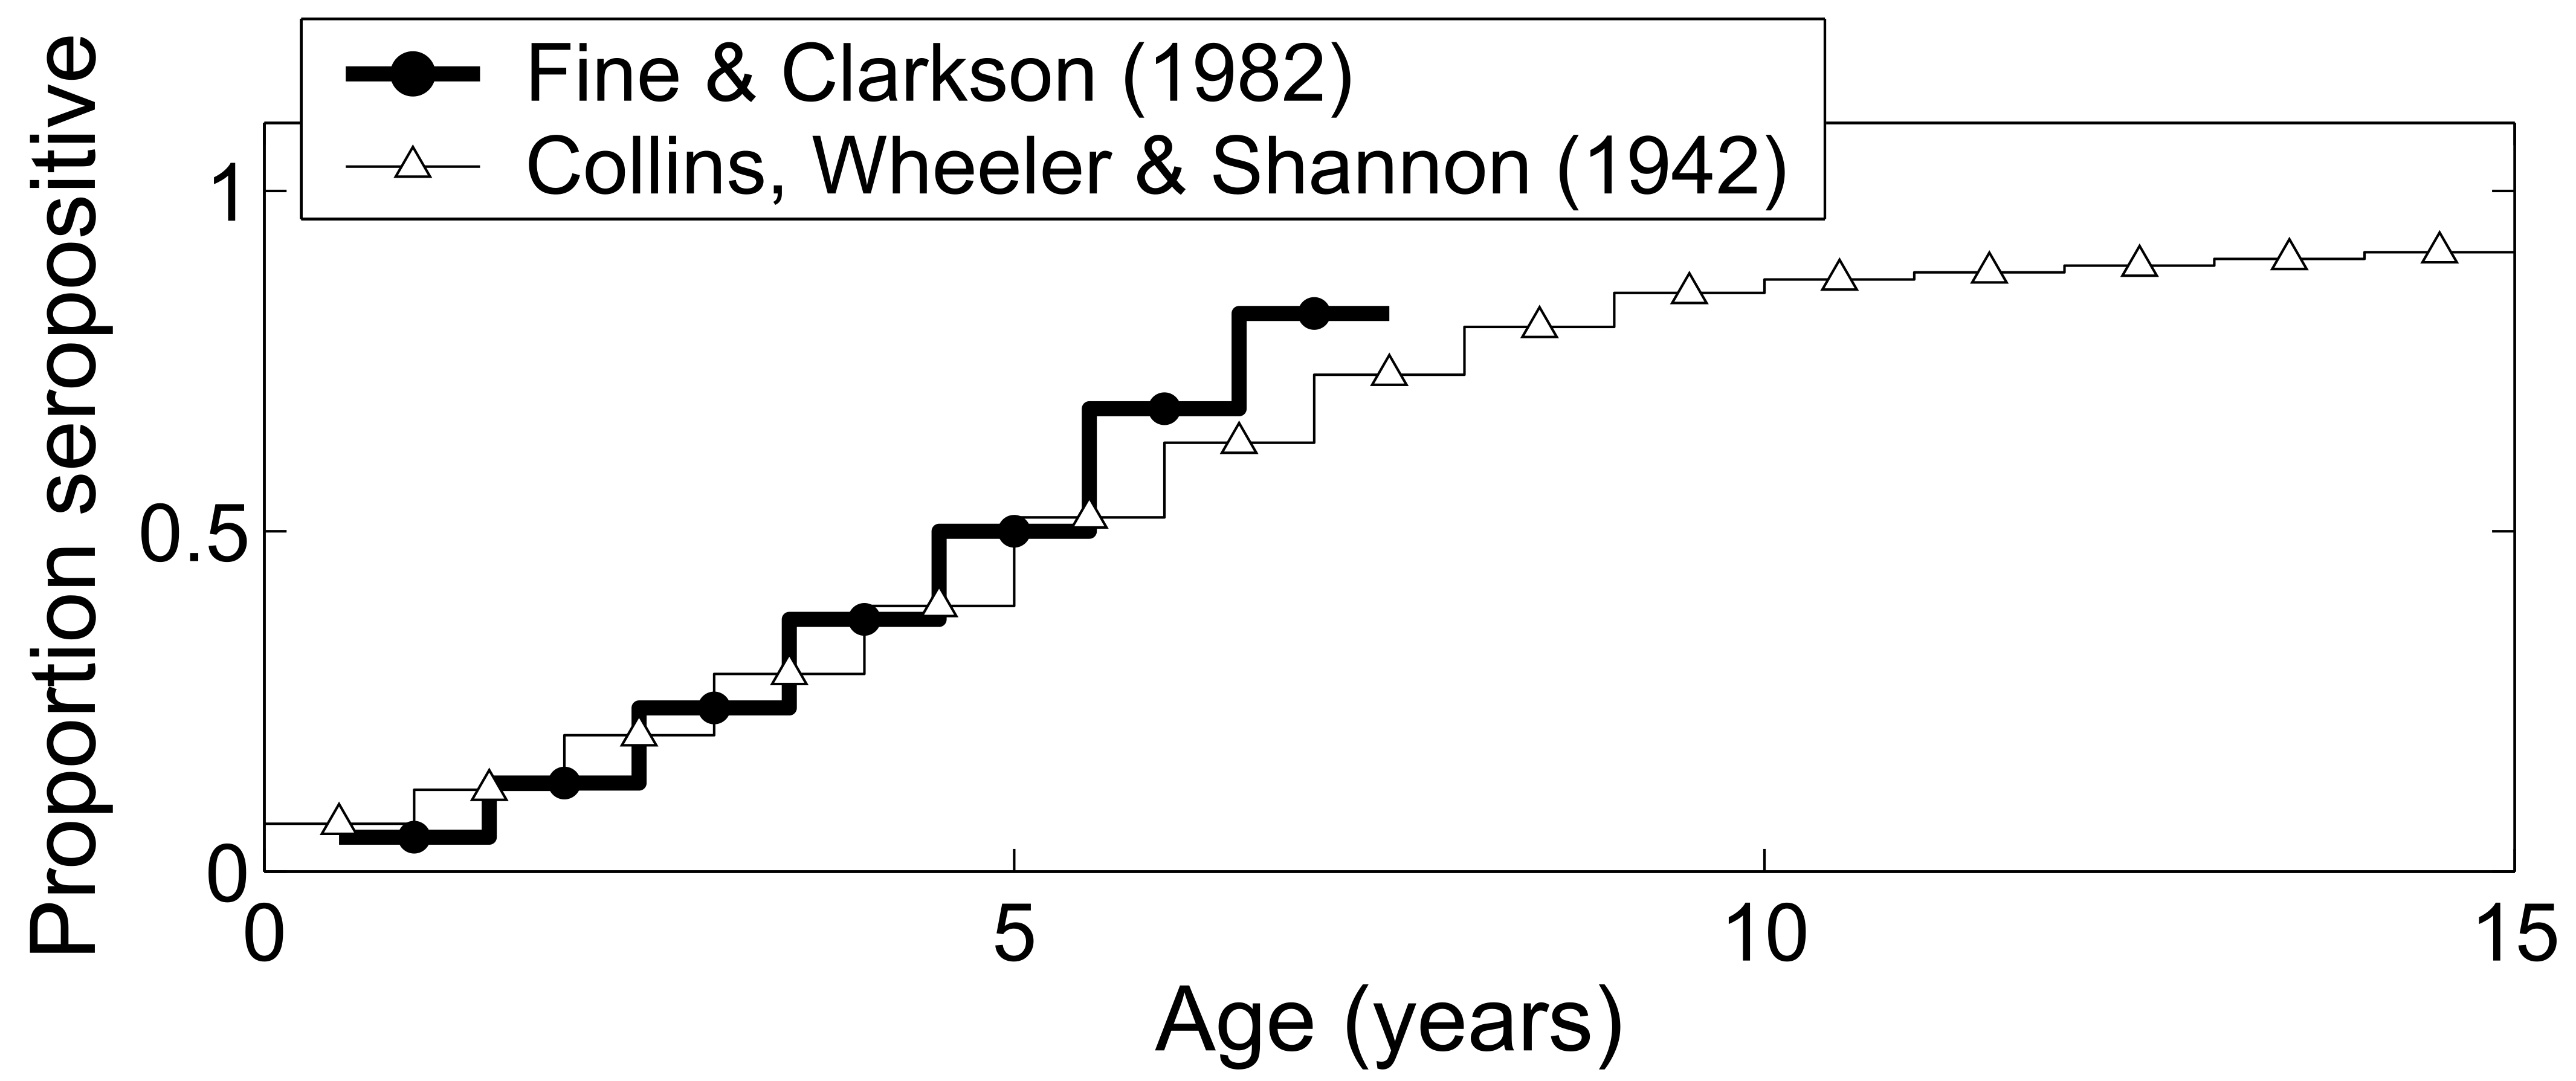 Fraction seropositive (previously infected) as function of age for measles. Source [@keeling08].